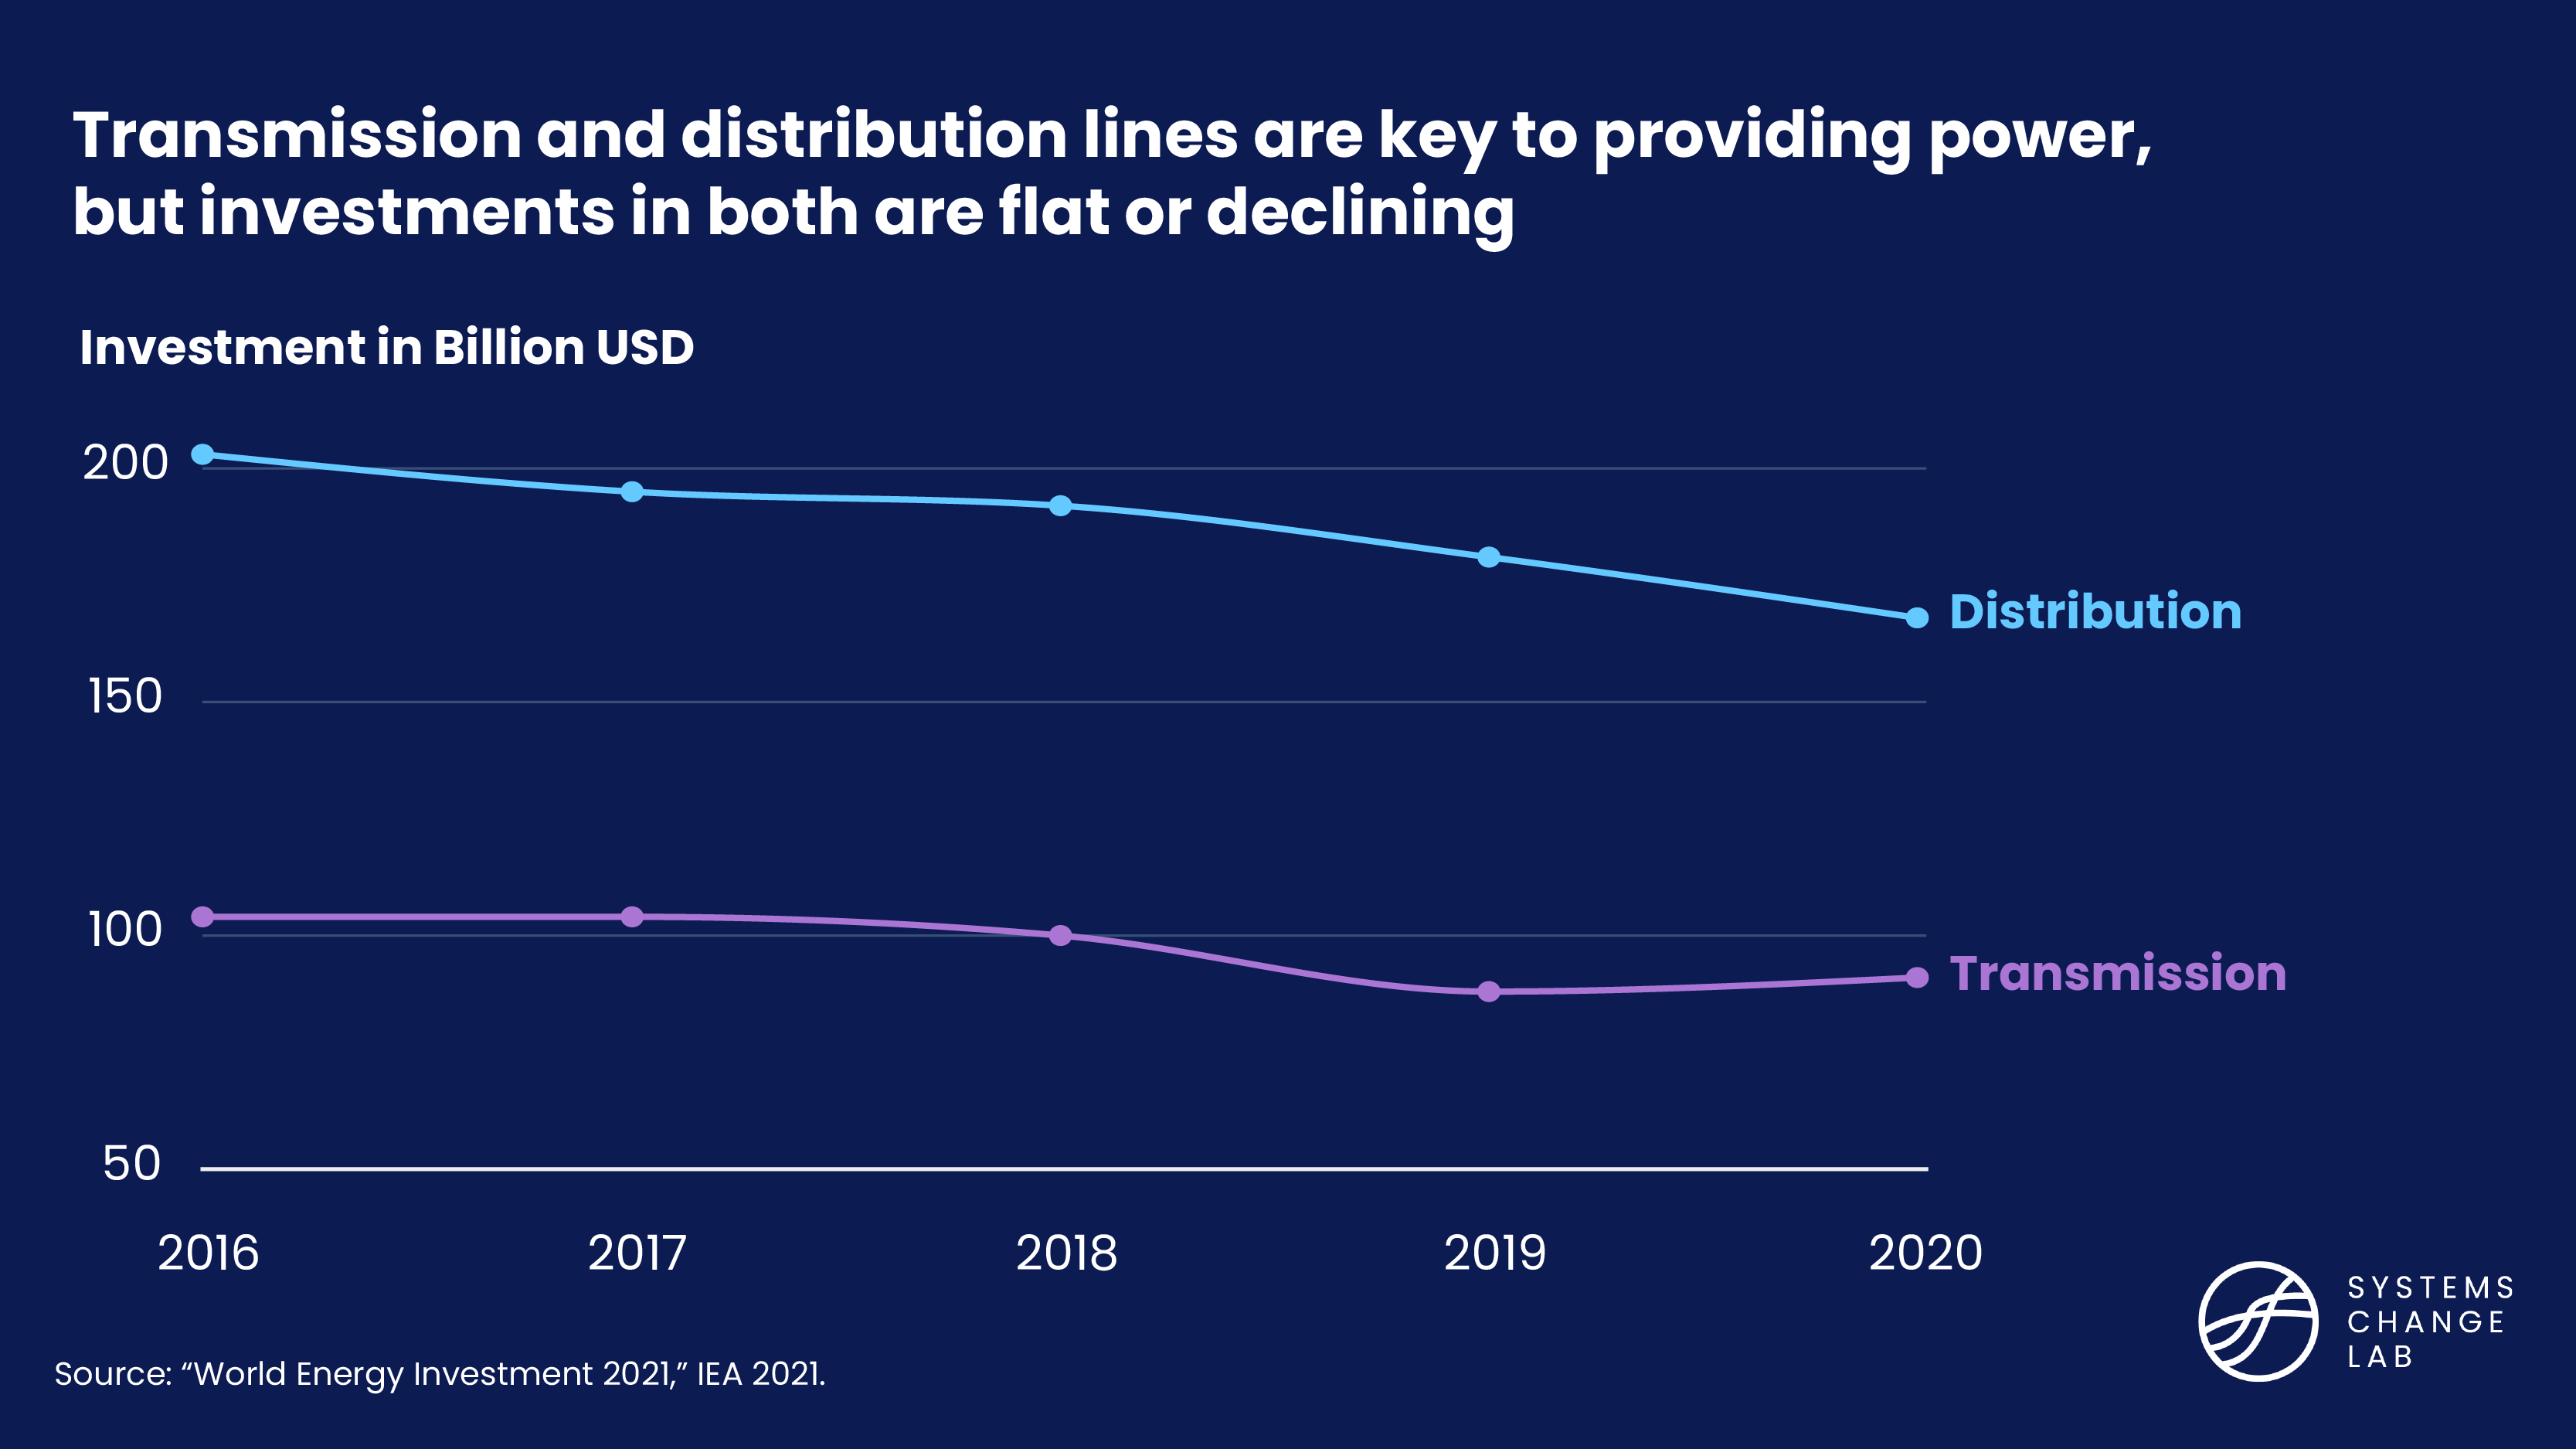 Investment in transmission and distribution lines over time, Transmission and distribution lines are key to providing power, but investments in both are flat or declining